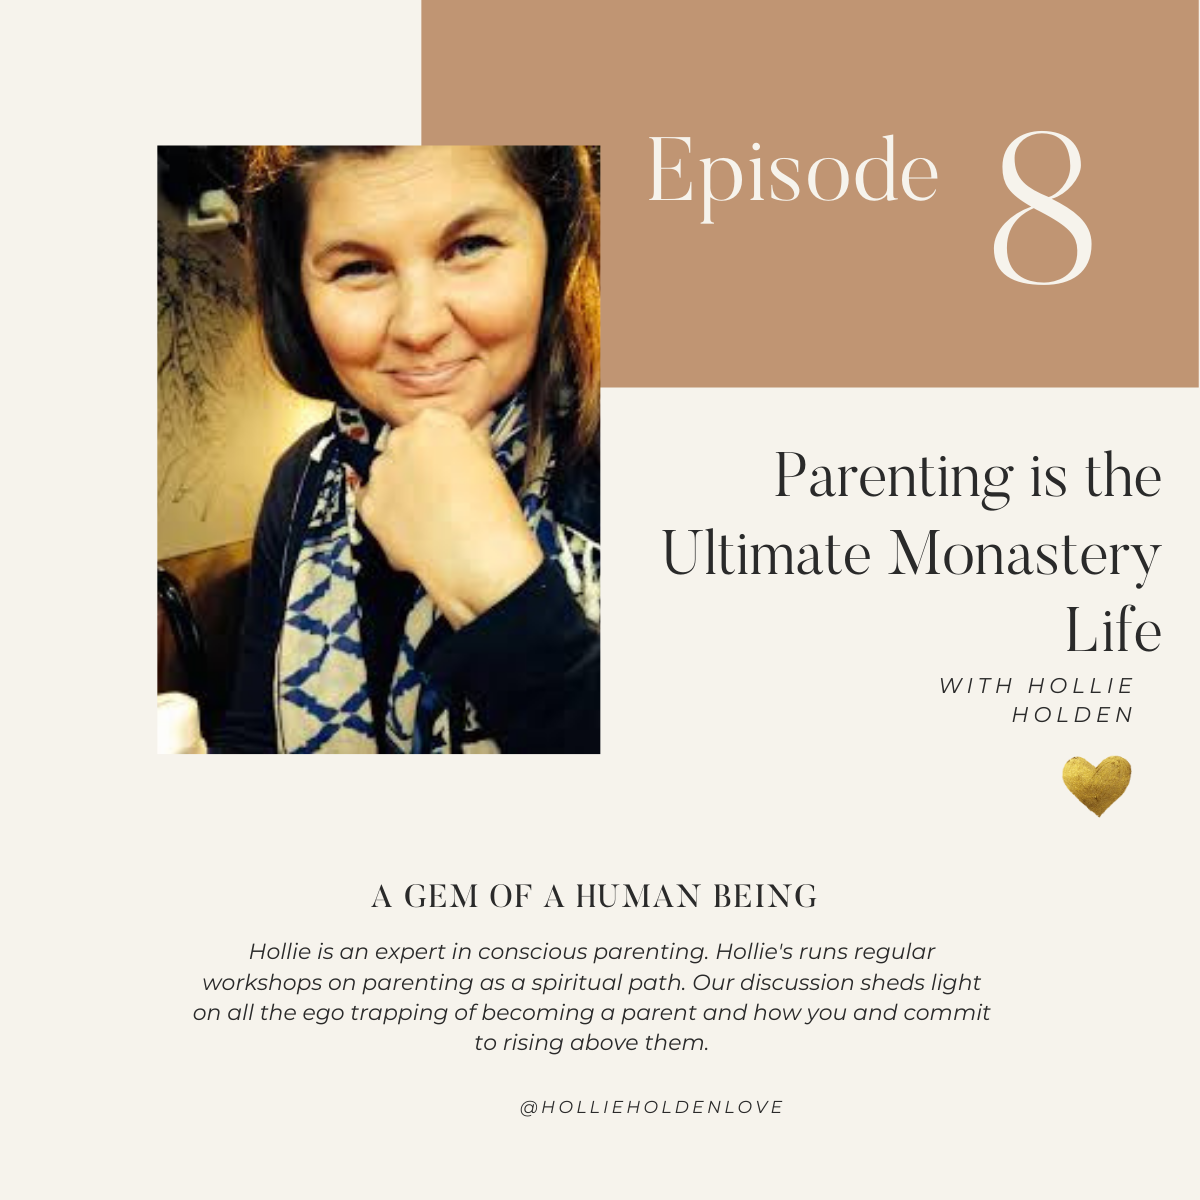 Parenting is the Ultimate Monastery Life!